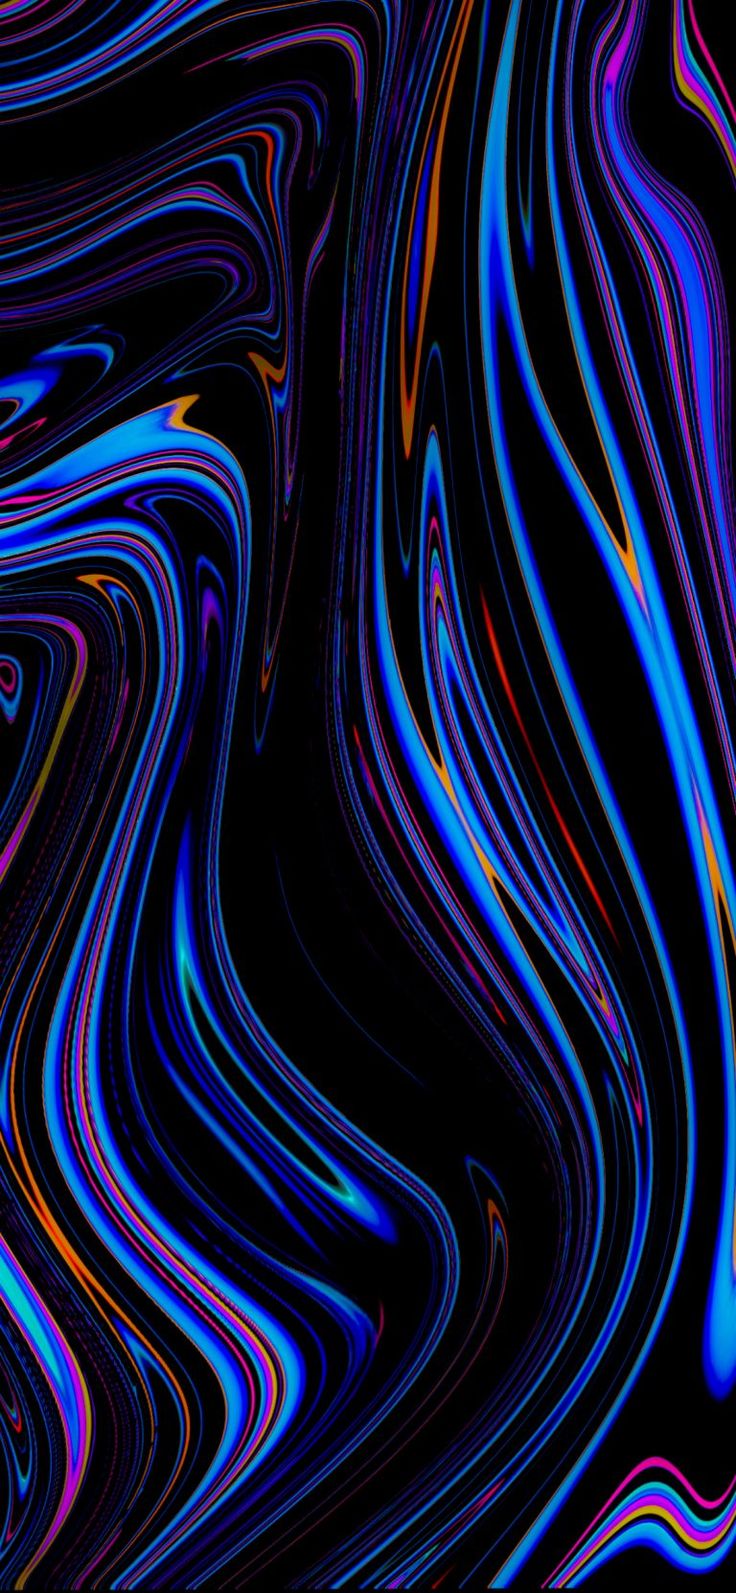 Cool Swirl Colorful Art Wallpapers